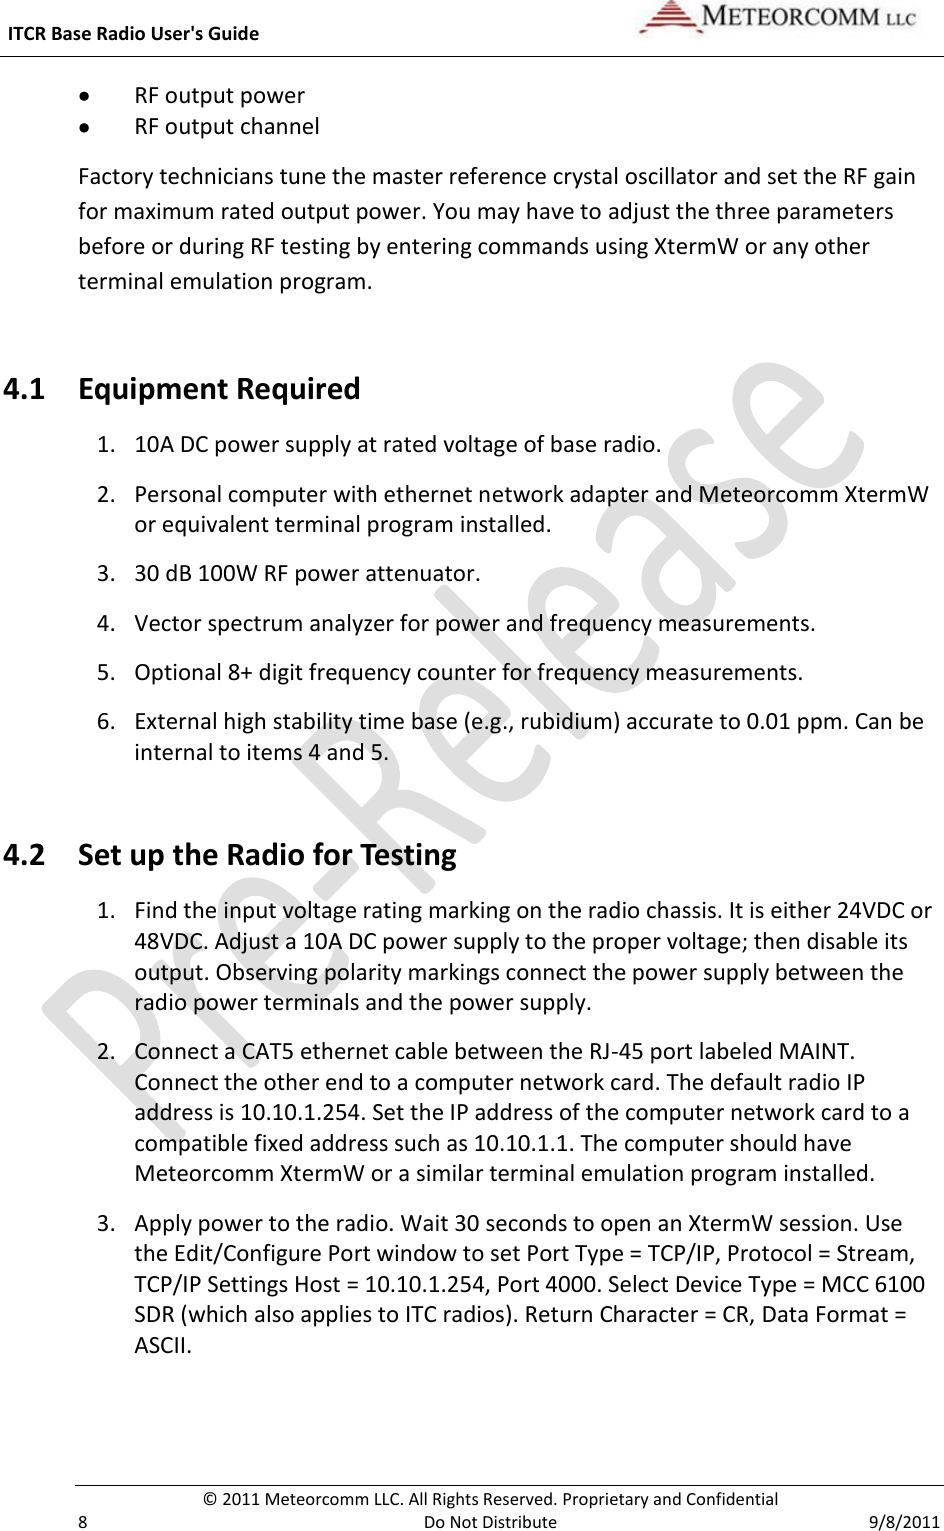  ITCR Base Radio User&apos;s Guide     © 2011 Meteorcomm LLC. All Rights Reserved. Proprietary and Confidential   8  Do Not Distribute  9/8/2011  RF output power  RF output channel Factory technicians tune the master reference crystal oscillator and set the RF gain for maximum rated output power. You may have to adjust the three parameters before or during RF testing by entering commands using XtermW or any other terminal emulation program.  4.1 Equipment Required 1. 10A DC power supply at rated voltage of base radio. 2. Personal computer with ethernet network adapter and Meteorcomm XtermW or equivalent terminal program installed. 3. 30 dB 100W RF power attenuator. 4. Vector spectrum analyzer for power and frequency measurements. 5. Optional 8+ digit frequency counter for frequency measurements. 6. External high stability time base (e.g., rubidium) accurate to 0.01 ppm. Can be internal to items 4 and 5. 4.2 Set up the Radio for Testing 1. Find the input voltage rating marking on the radio chassis. It is either 24VDC or 48VDC. Adjust a 10A DC power supply to the proper voltage; then disable its output. Observing polarity markings connect the power supply between the radio power terminals and the power supply. 2. Connect a CAT5 ethernet cable between the RJ-45 port labeled MAINT. Connect the other end to a computer network card. The default radio IP address is 10.10.1.254. Set the IP address of the computer network card to a compatible fixed address such as 10.10.1.1. The computer should have Meteorcomm XtermW or a similar terminal emulation program installed.    3. Apply power to the radio. Wait 30 seconds to open an XtermW session. Use the Edit/Configure Port window to set Port Type = TCP/IP, Protocol = Stream, TCP/IP Settings Host = 10.10.1.254, Port 4000. Select Device Type = MCC 6100 SDR (which also applies to ITC radios). Return Character = CR, Data Format = ASCII. 